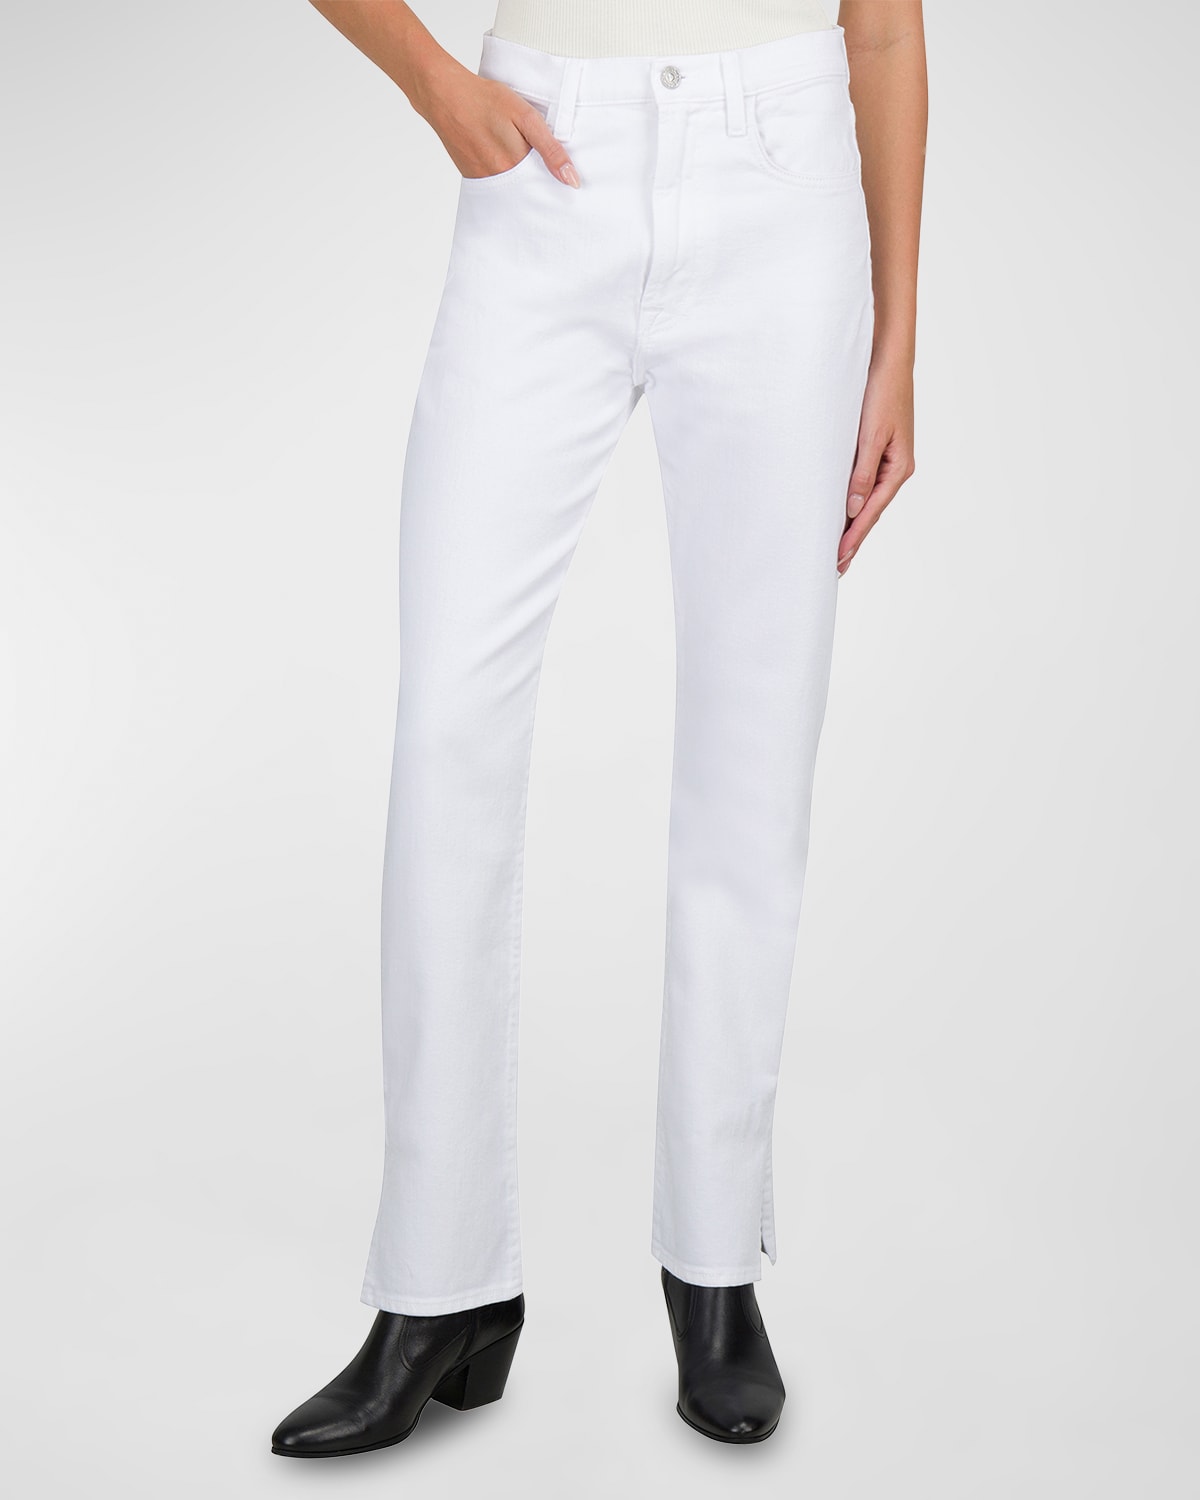 7 for all mankind Easy Slim Distressed Skinny Jeans | Neiman Marcus